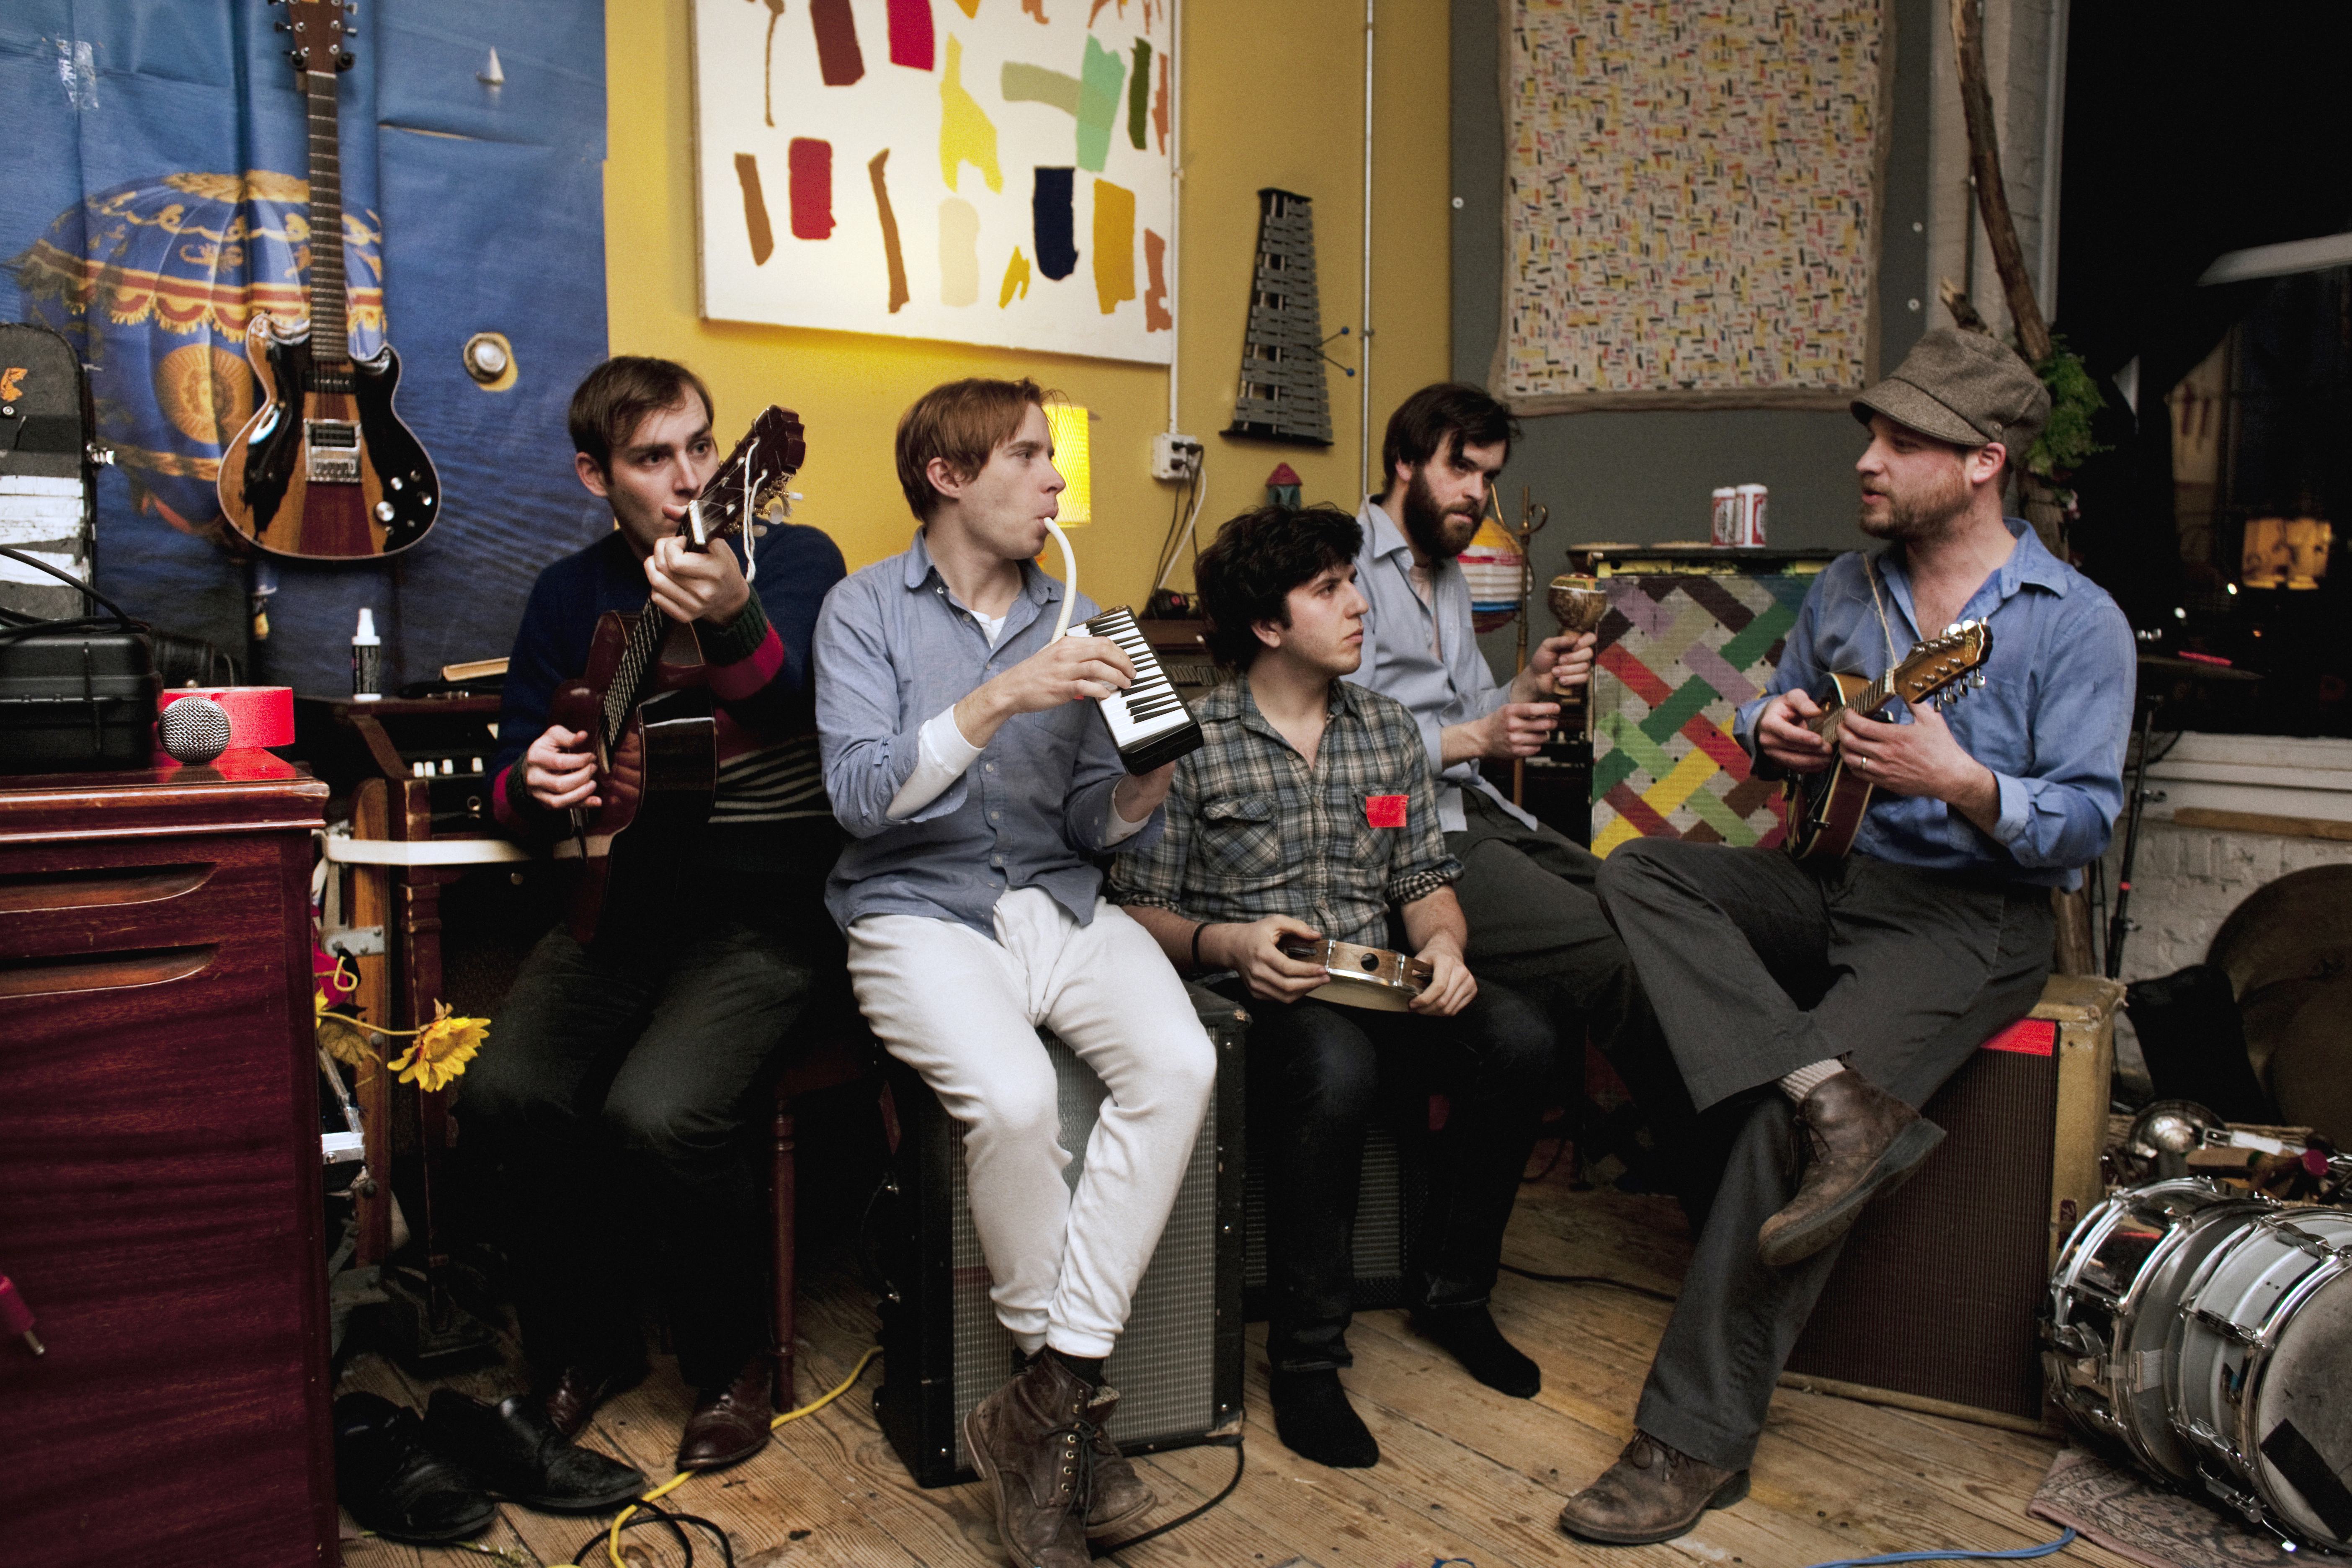 DR. DOG TO TOUR IN FALL, RELEASE NEW ALBUM NEXT YEAR